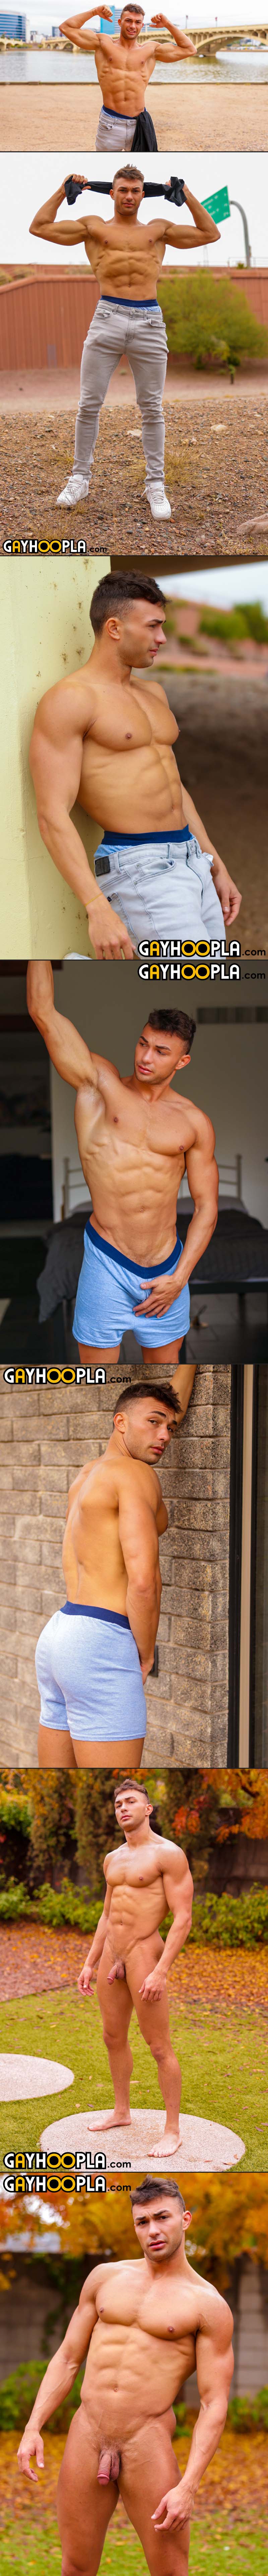 Dallas Blue [Busts The Biggest Nut Of His Life, Then Does It Again!] at GayHoopla